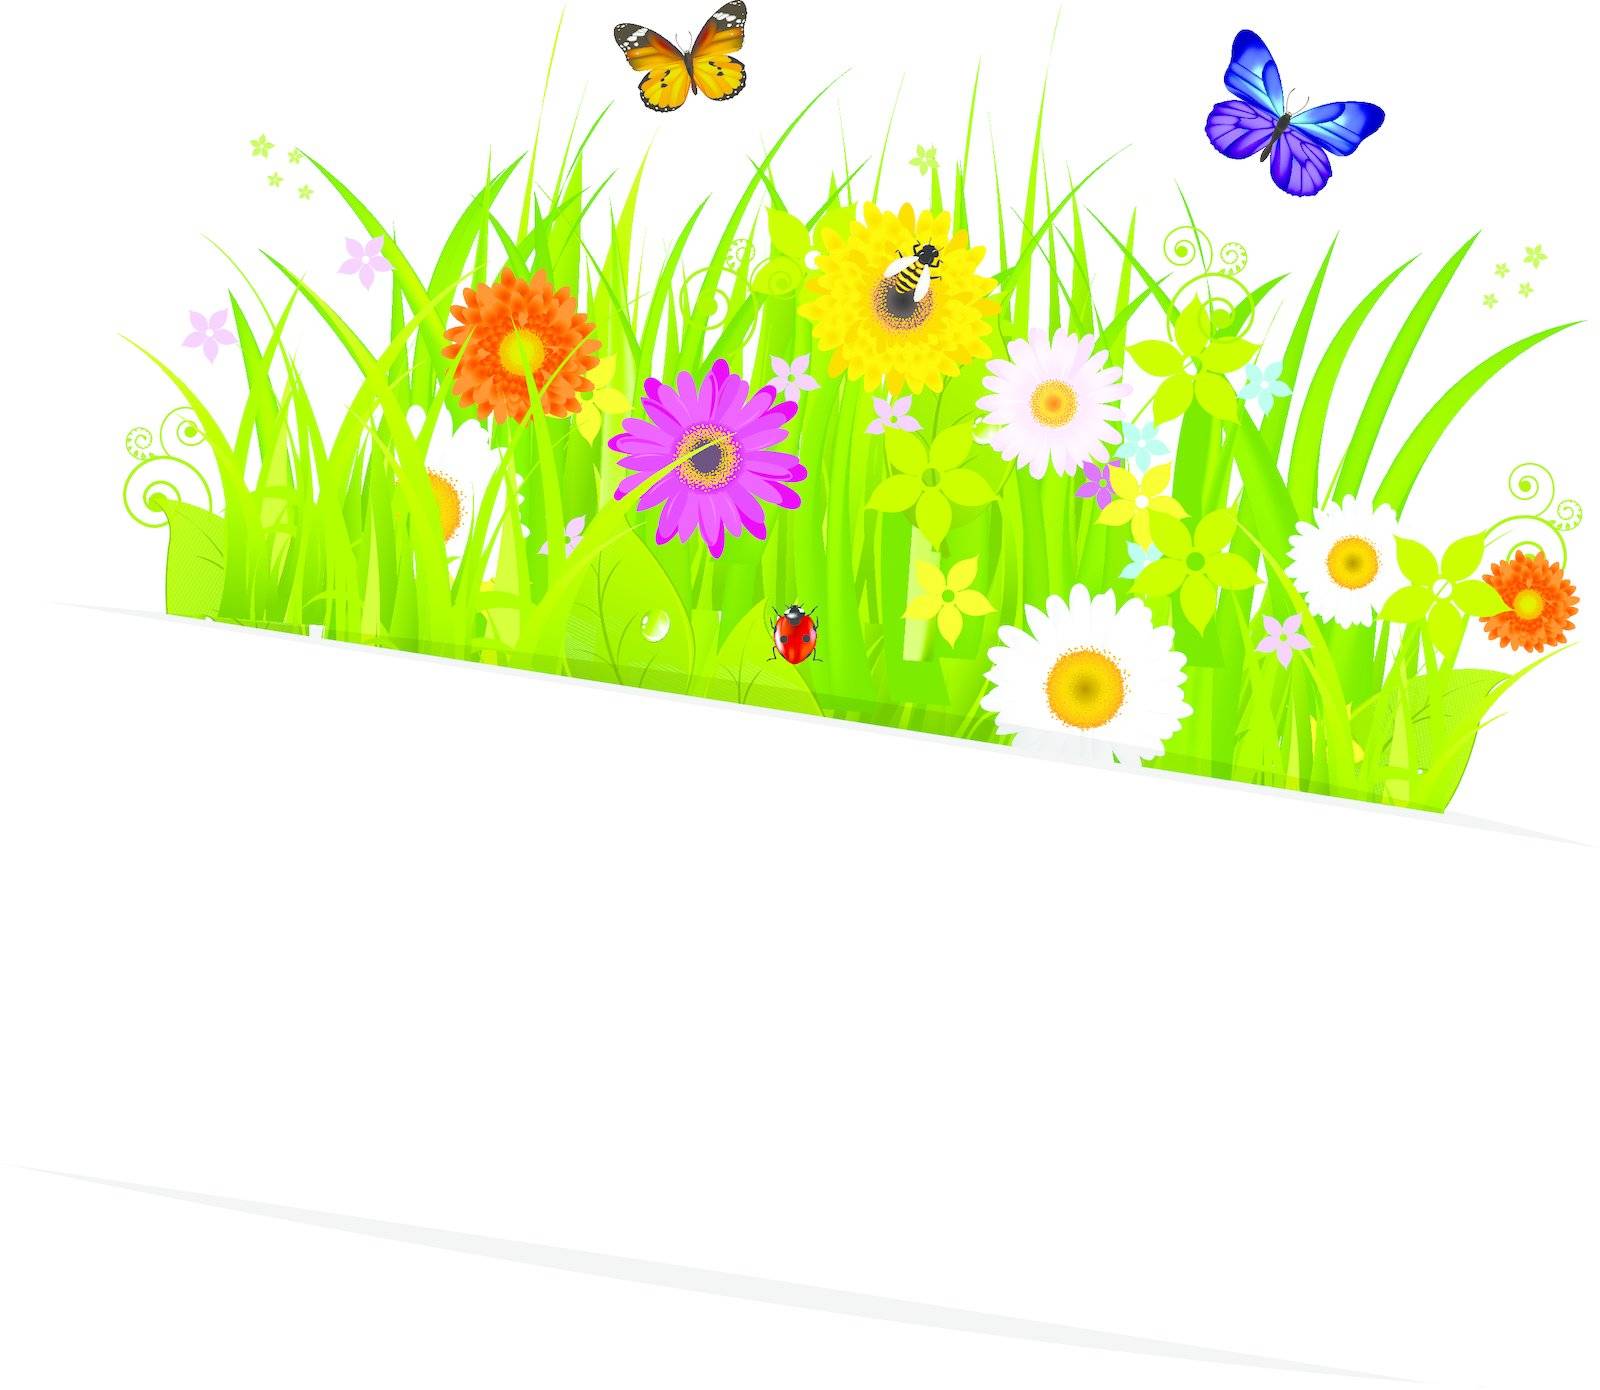 Paper Sticky With Grass And Flowers by adamson